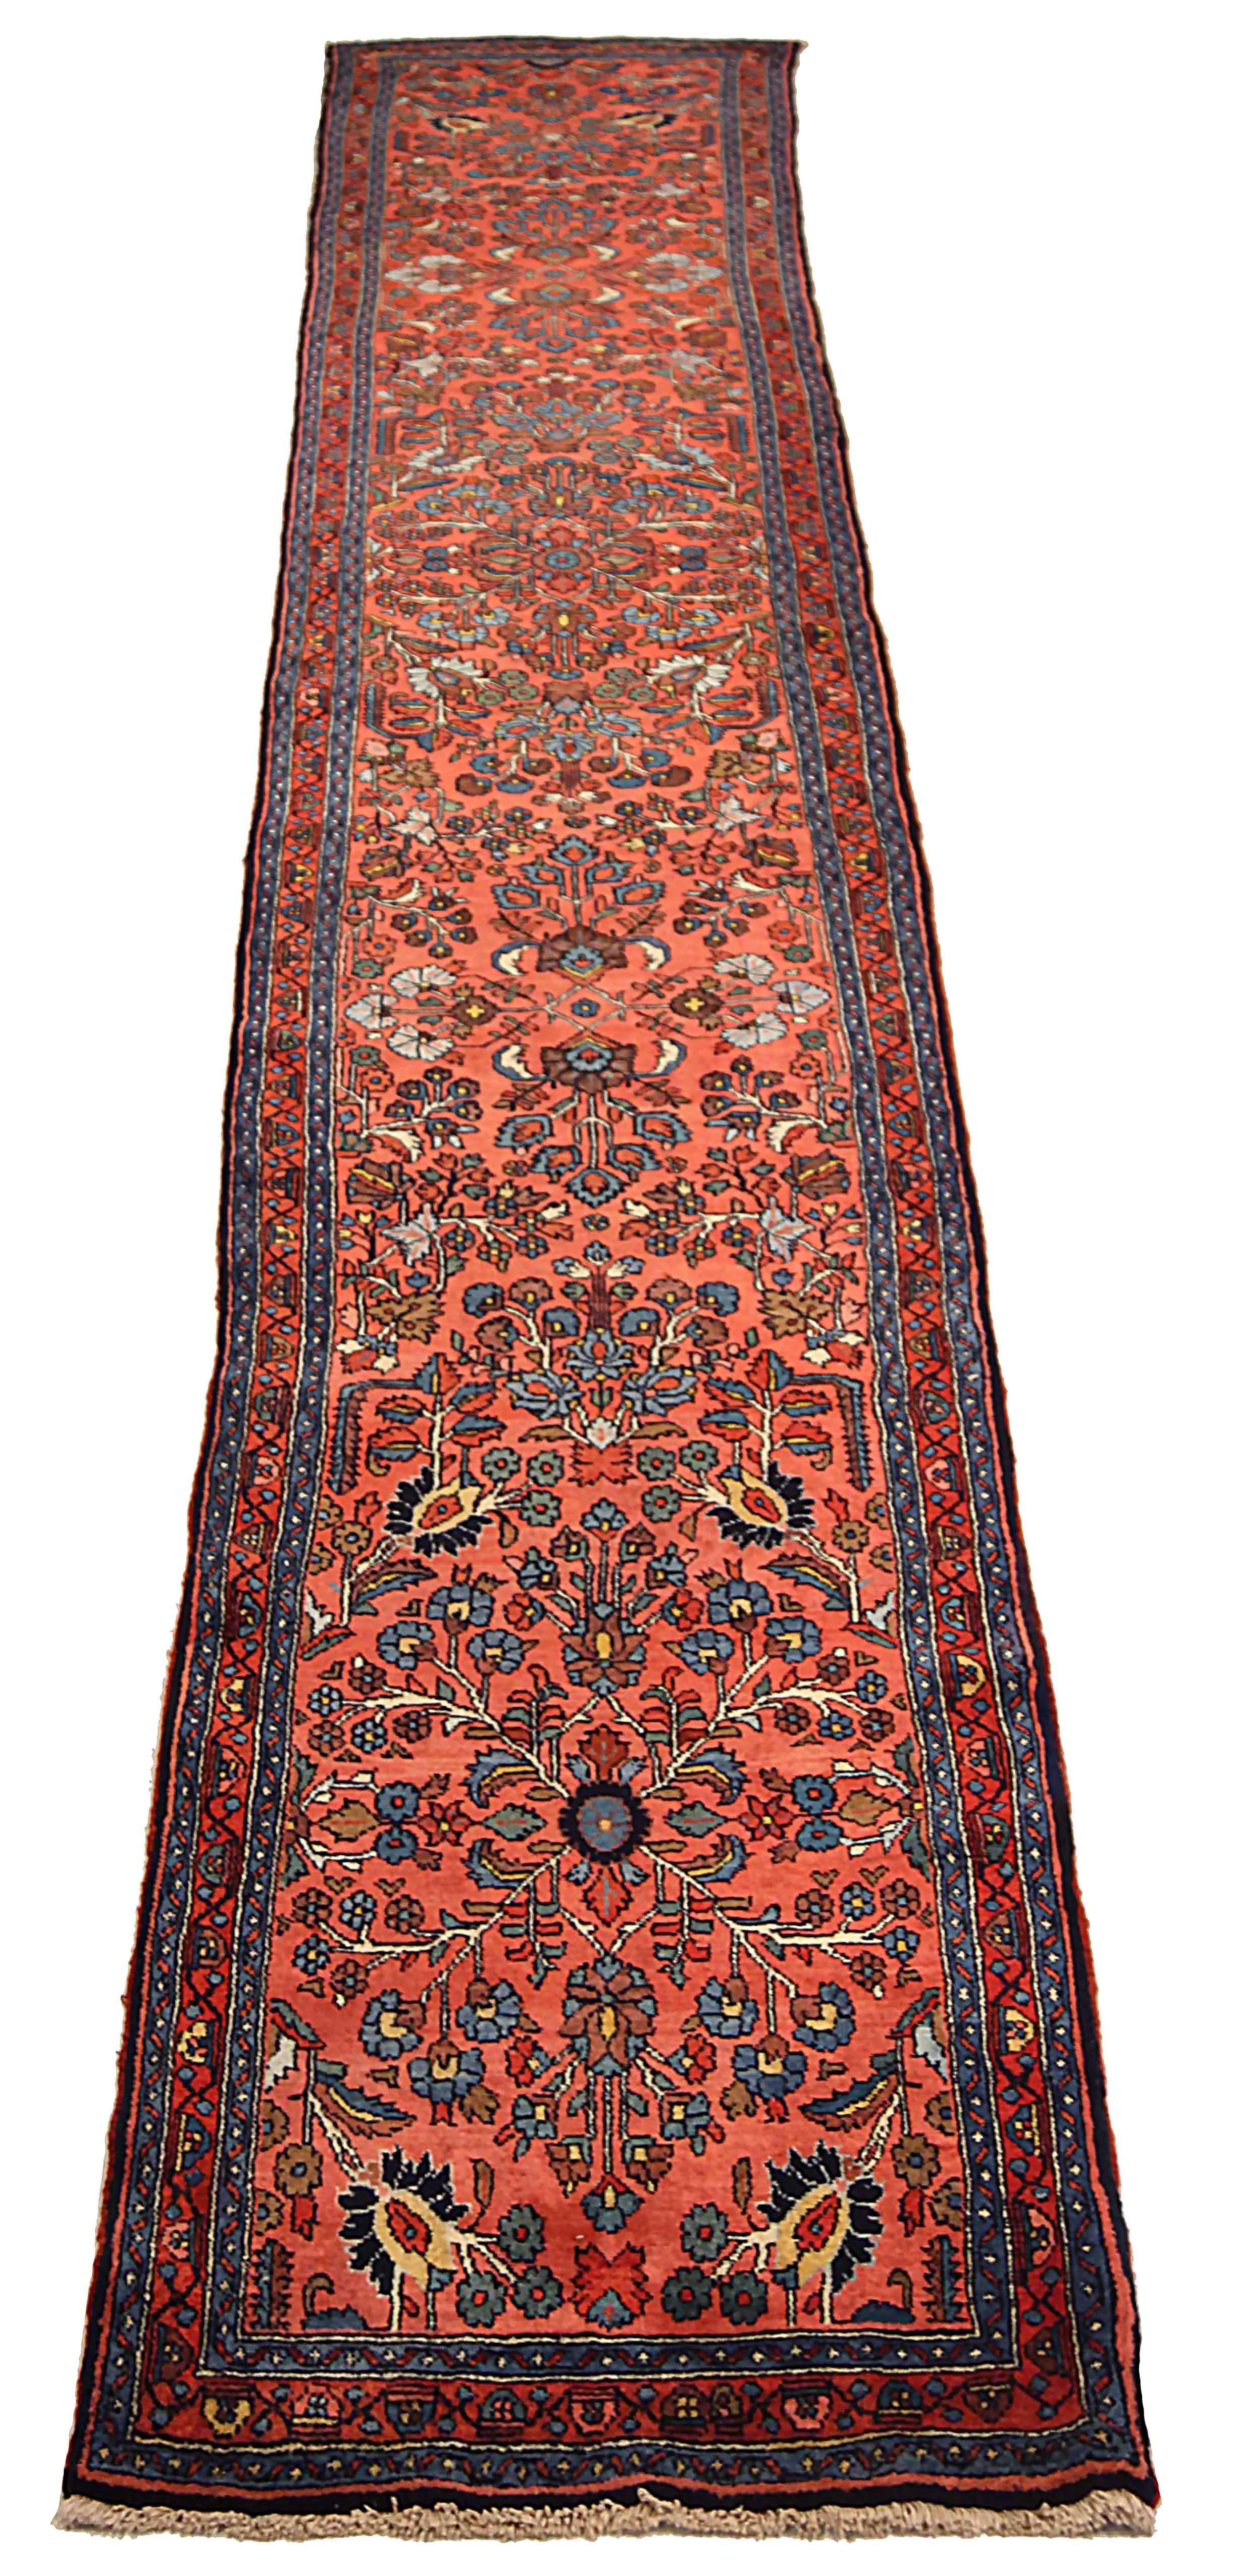 Antique Persian runner rug handwoven from the finest sheep’s wool. It’s colored with all-natural vegetable dyes that are safe for humans and pets. It’s a traditional Hamedan design handwoven by expert artisans. It’s a lovely runner rug that can be